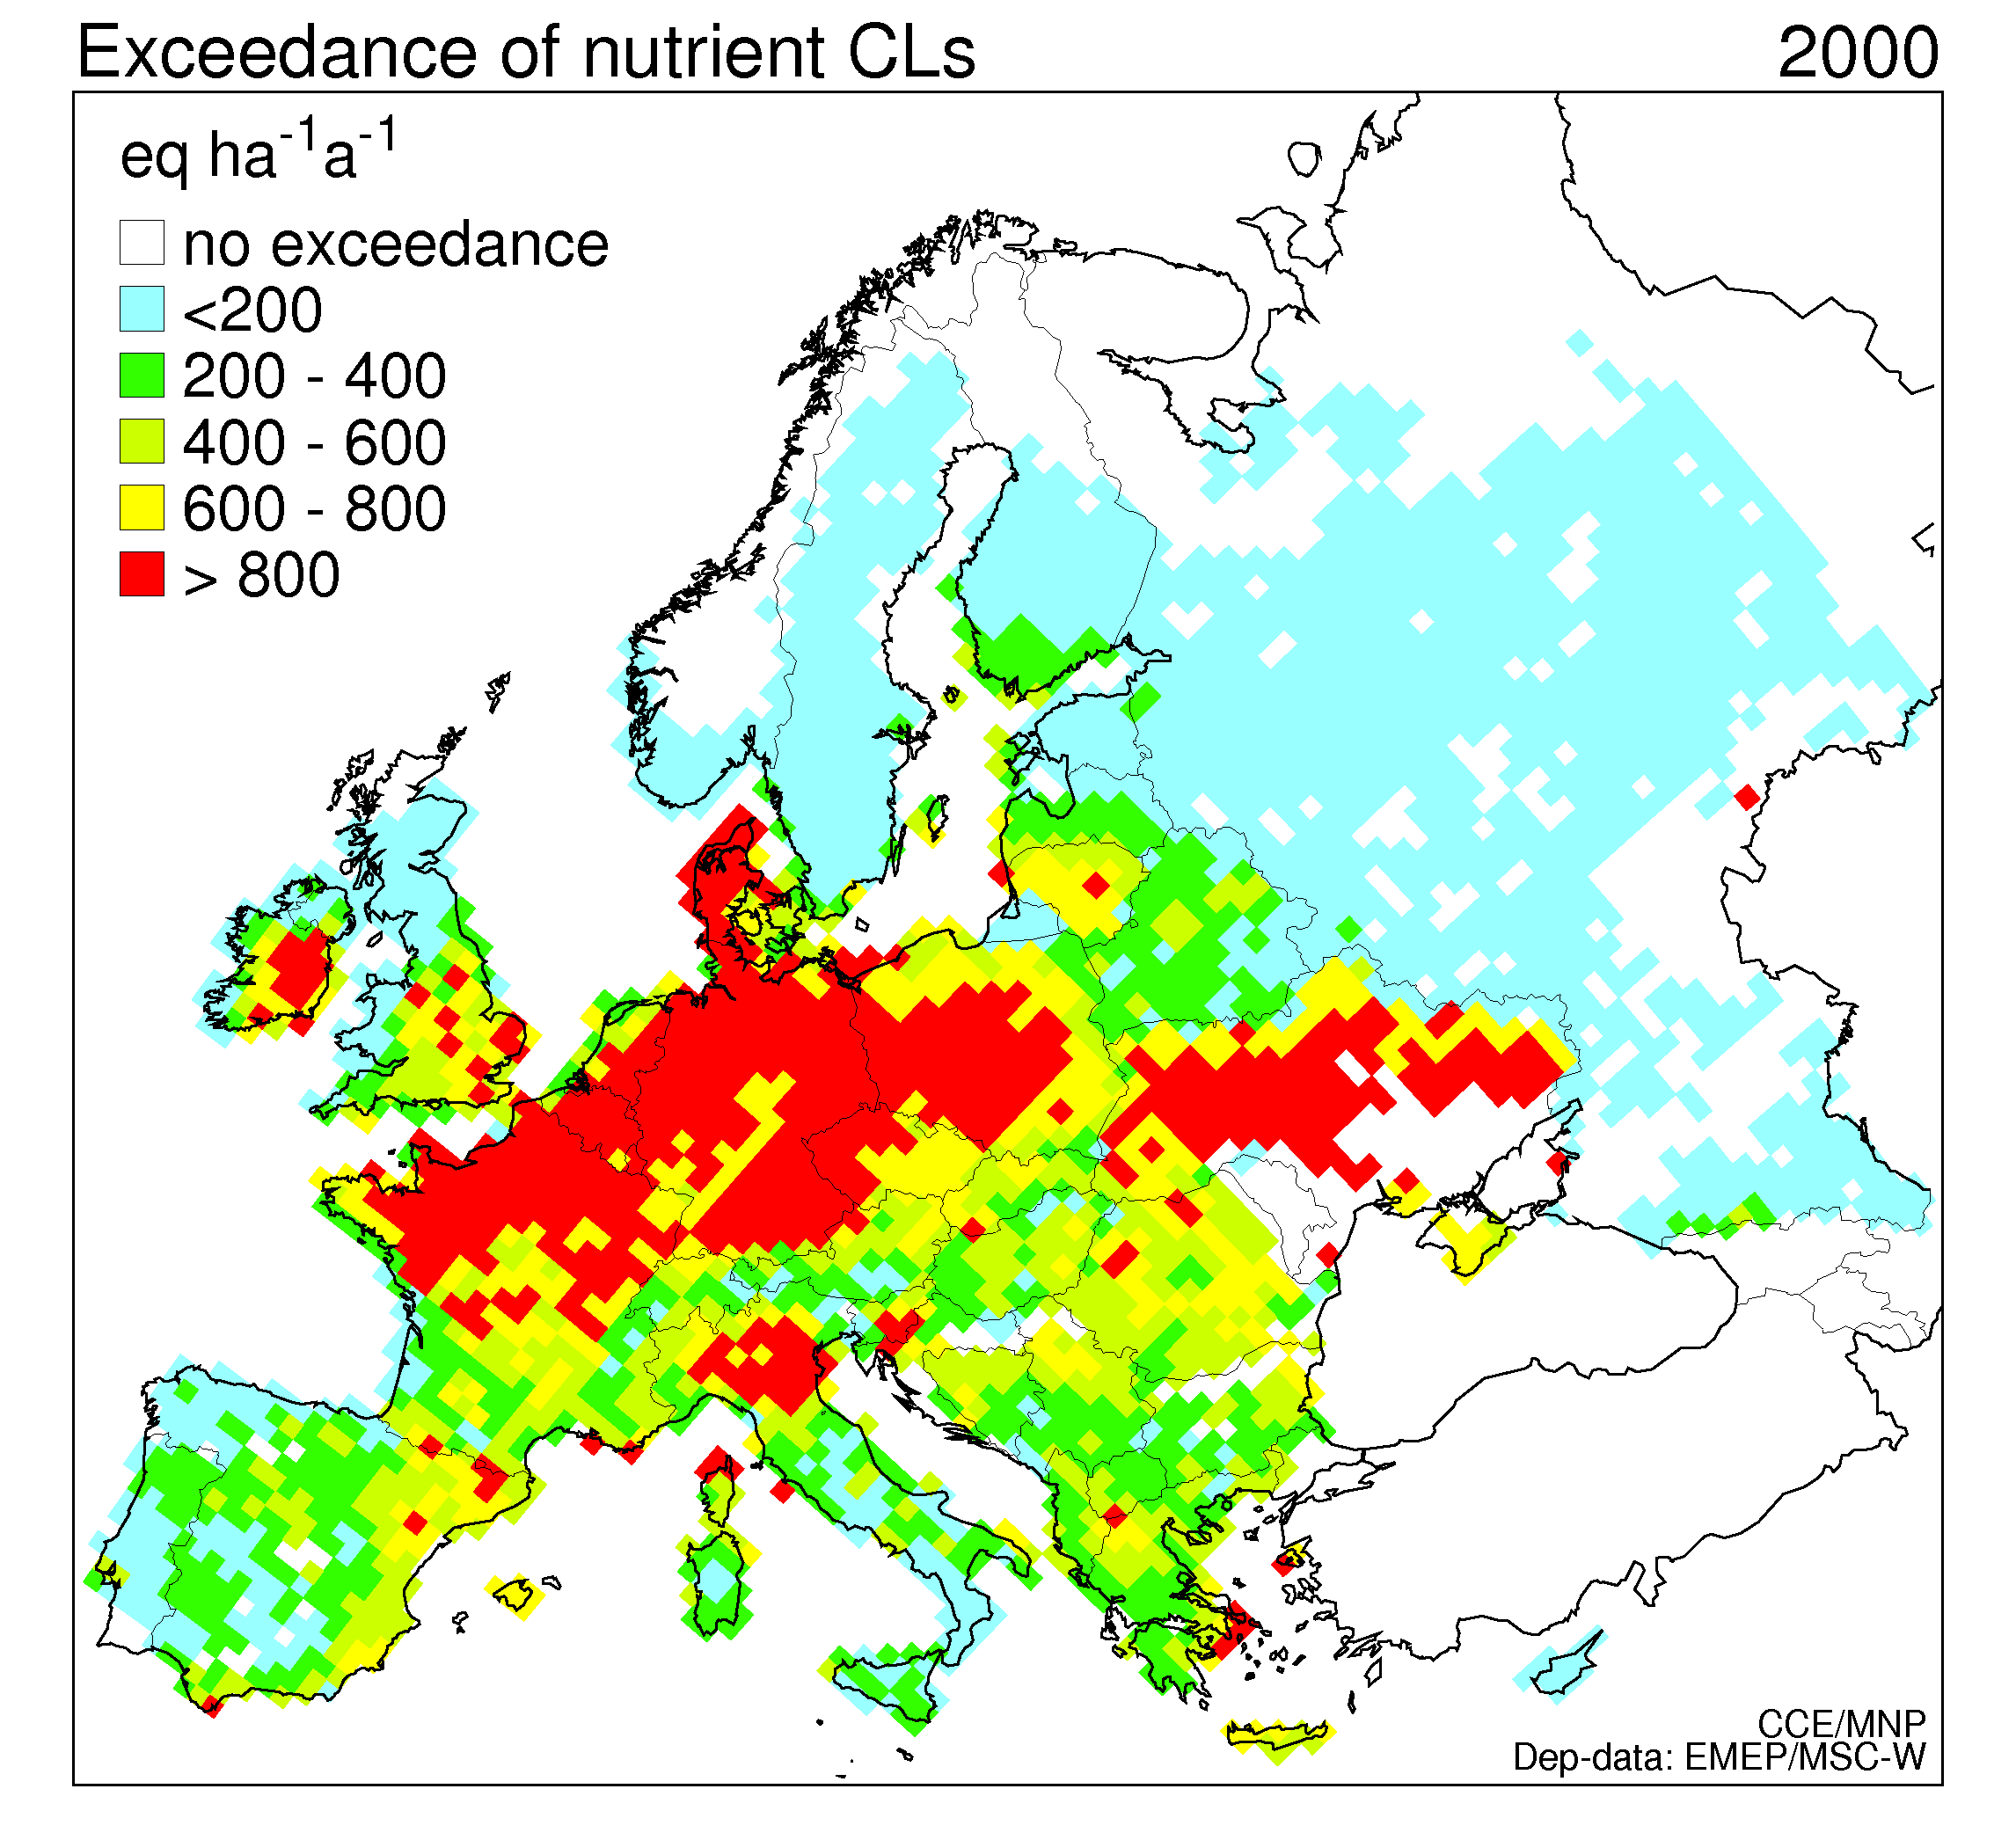 Exceedance of the critical loads for eutrophication in Europe (as average accumulated exceedances), 2000